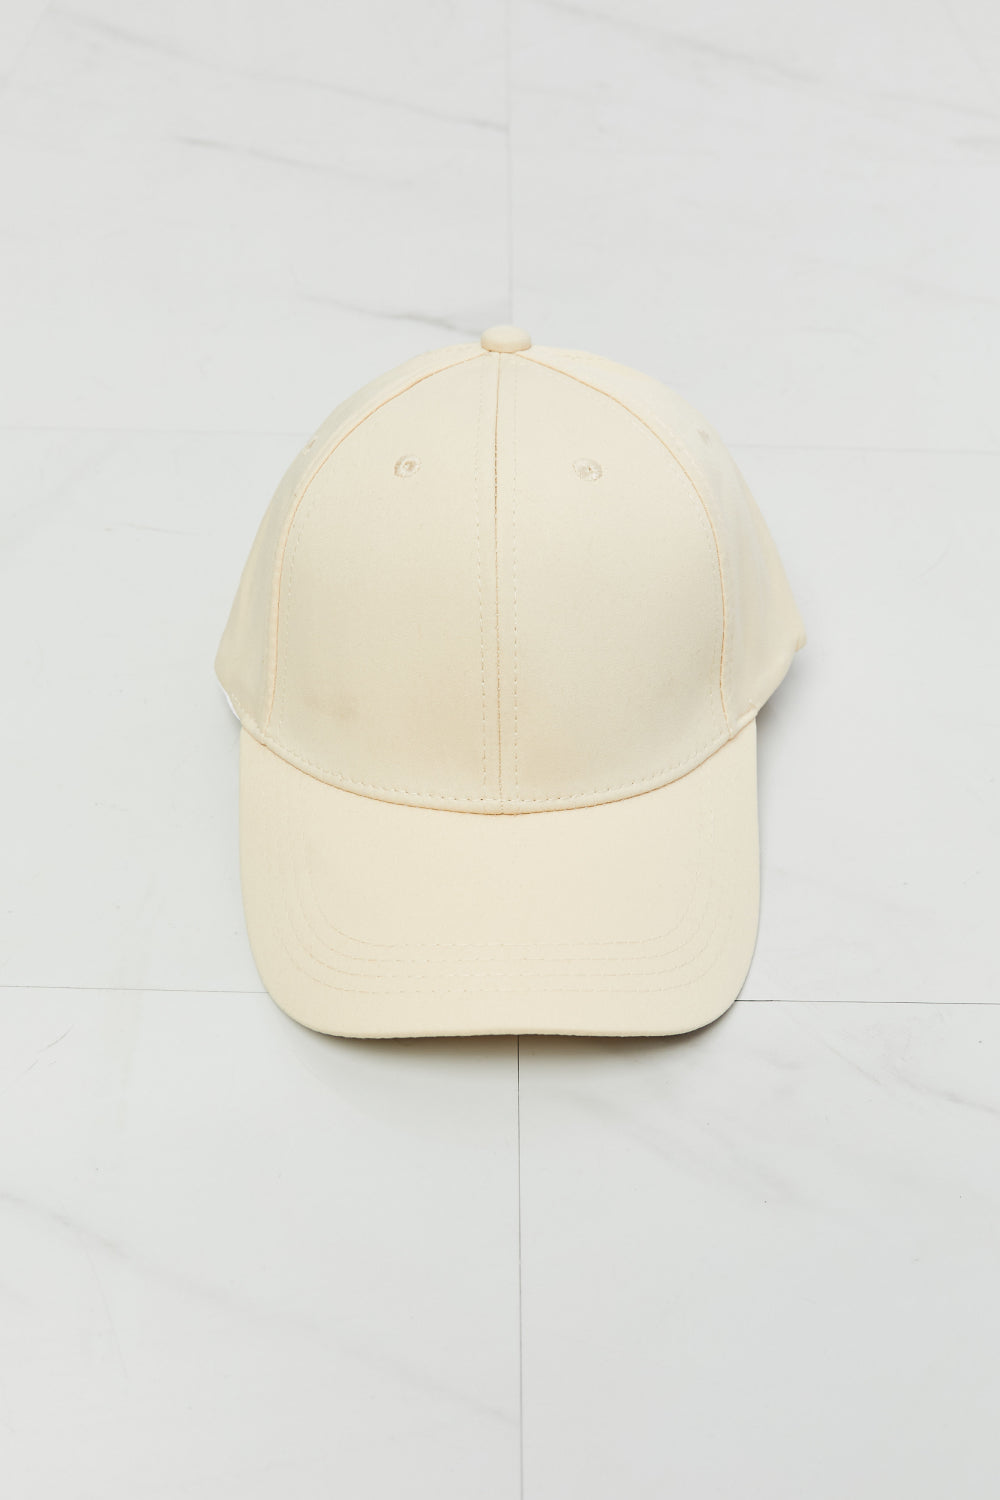 Fame Everyday Baseball Cap - Cheeky Chic Boutique